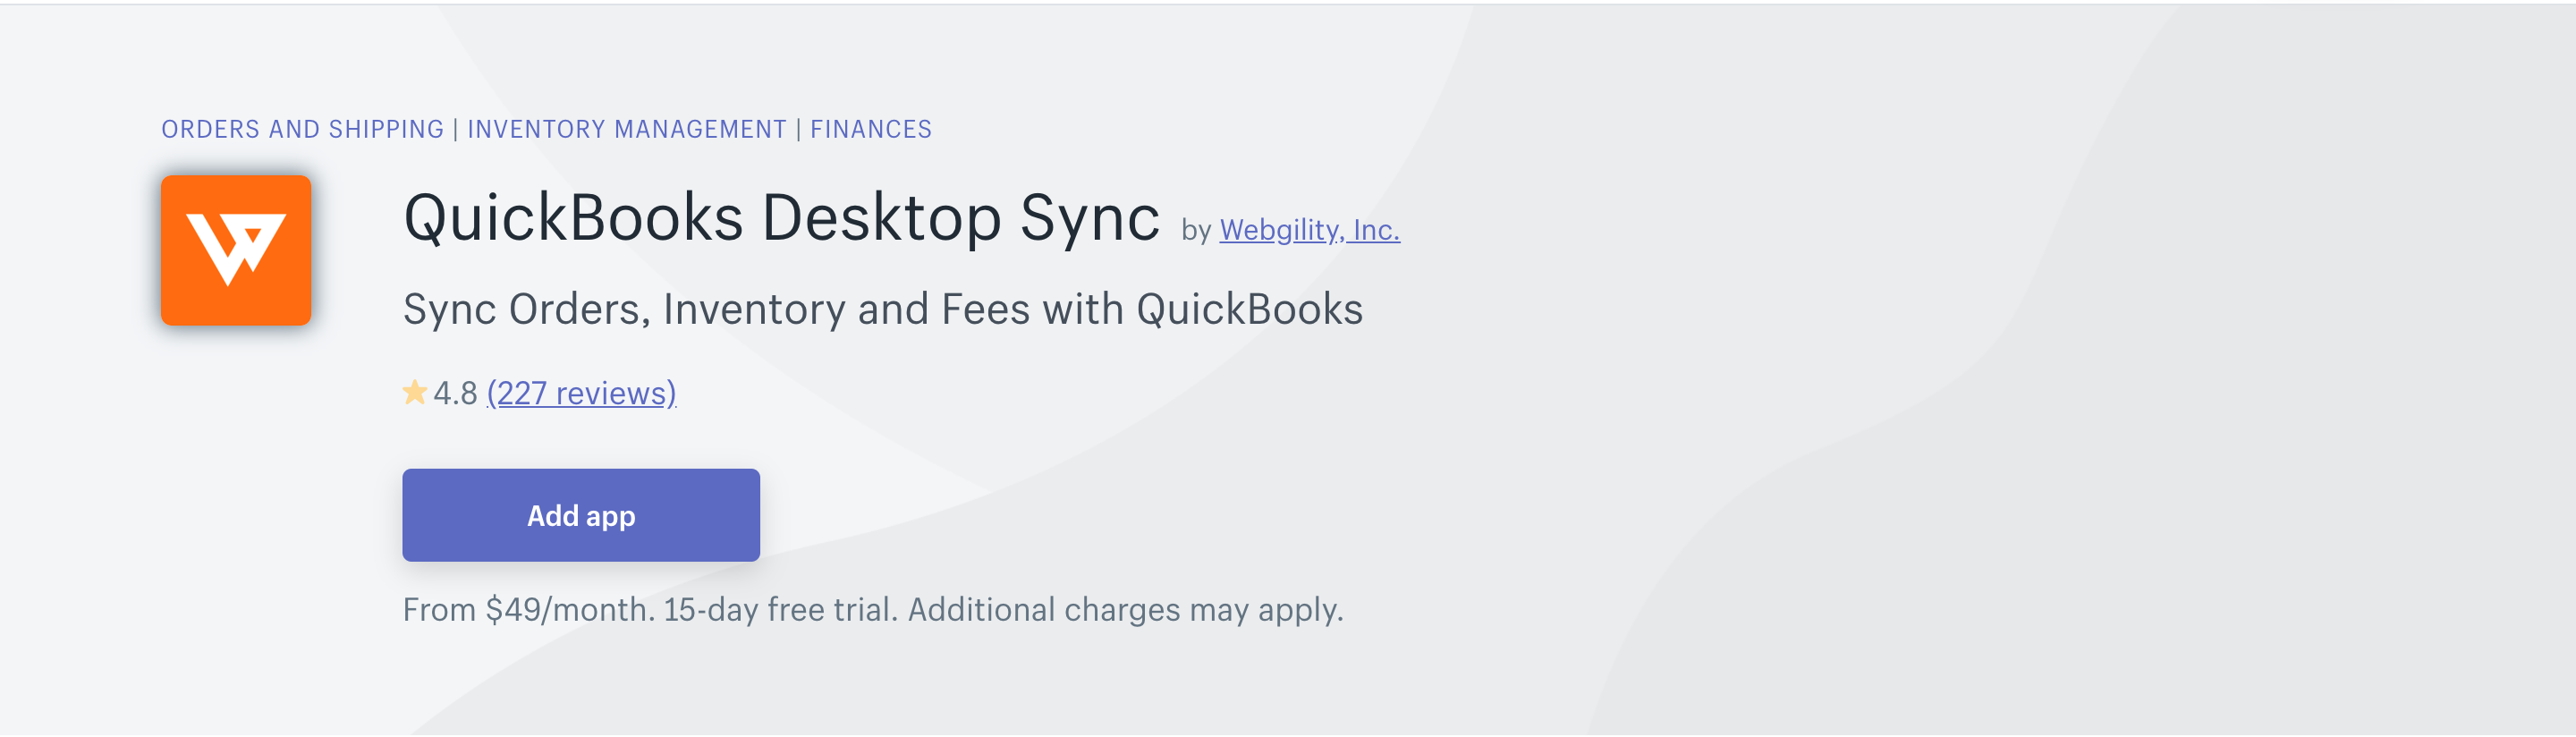 Apps to Integrate Quickbooks and Shopify: Quickbooks Desktop Sync by Webgility